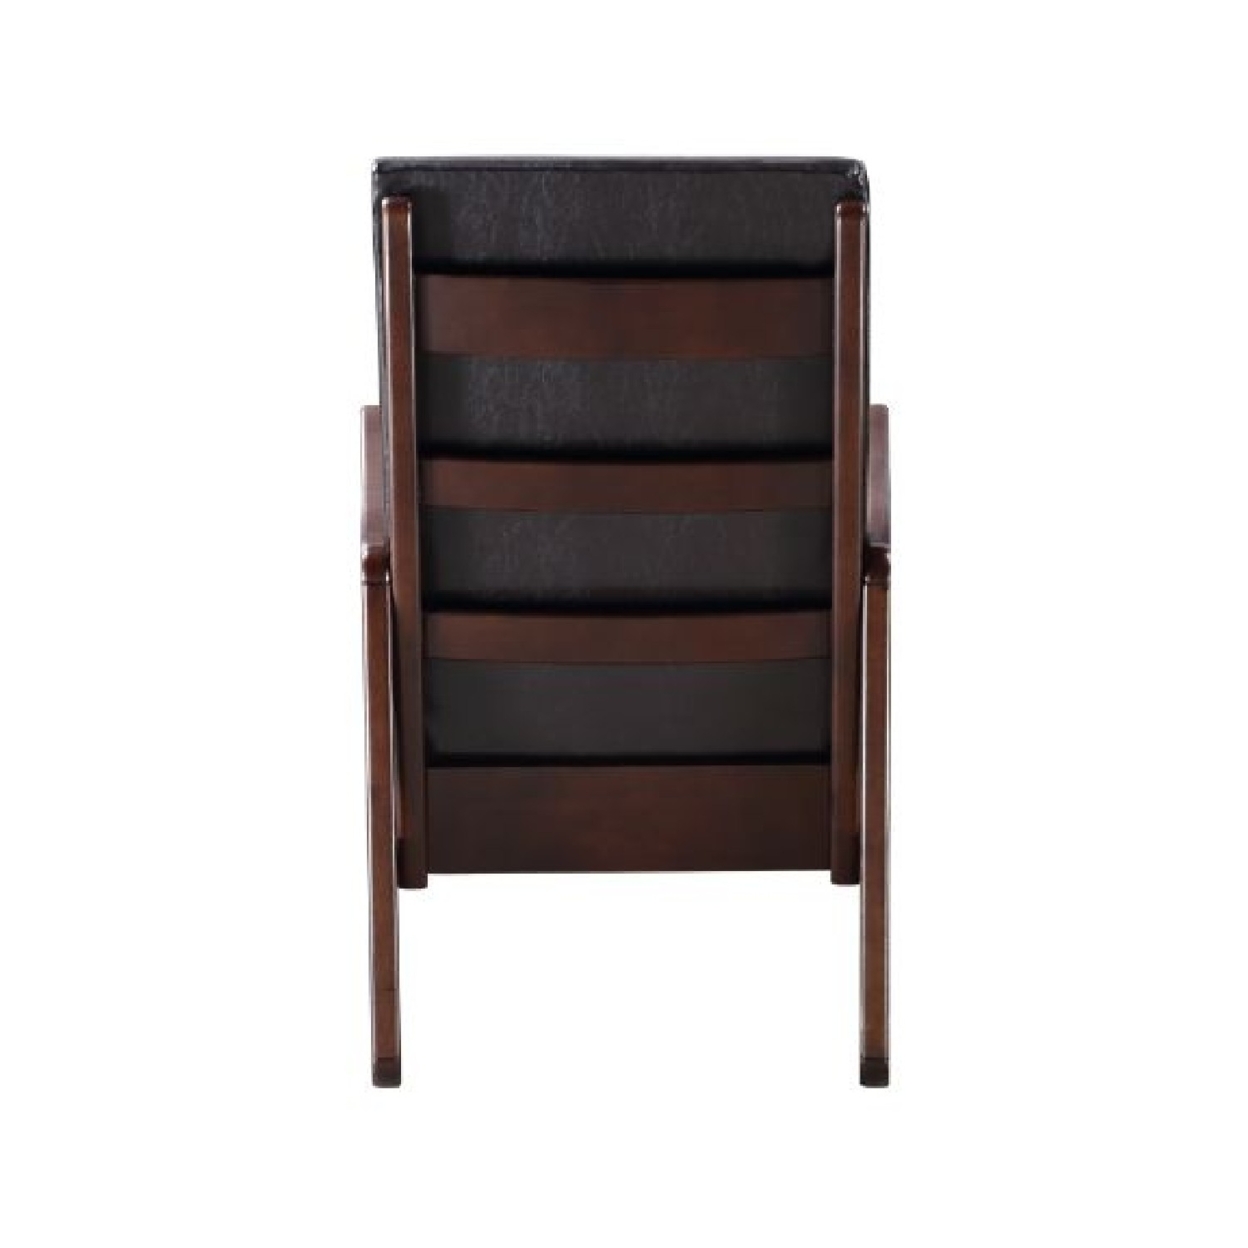 Rocking Chair With Leatherette Seating And Wooden Frame, Black- Saltoro Sherpi